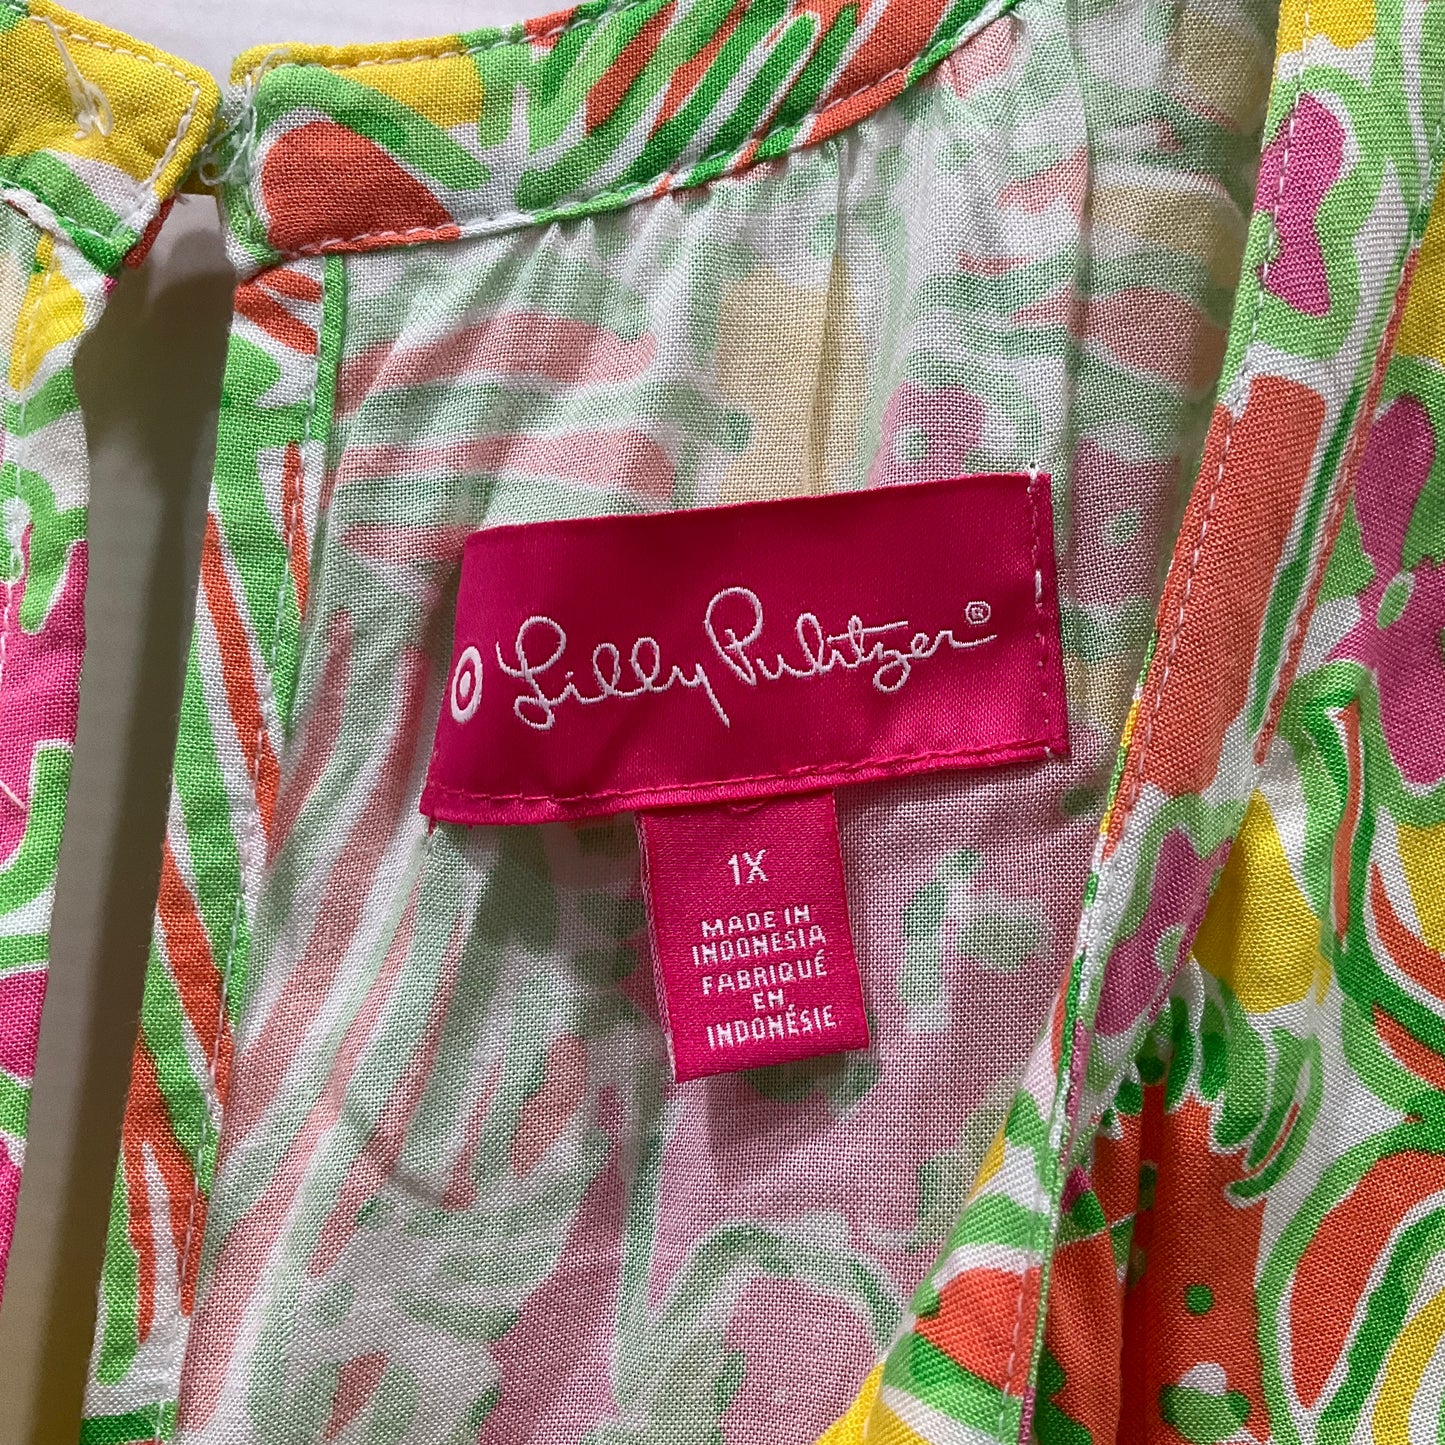 Romper By Lilly Pulitzer  Size: 1x